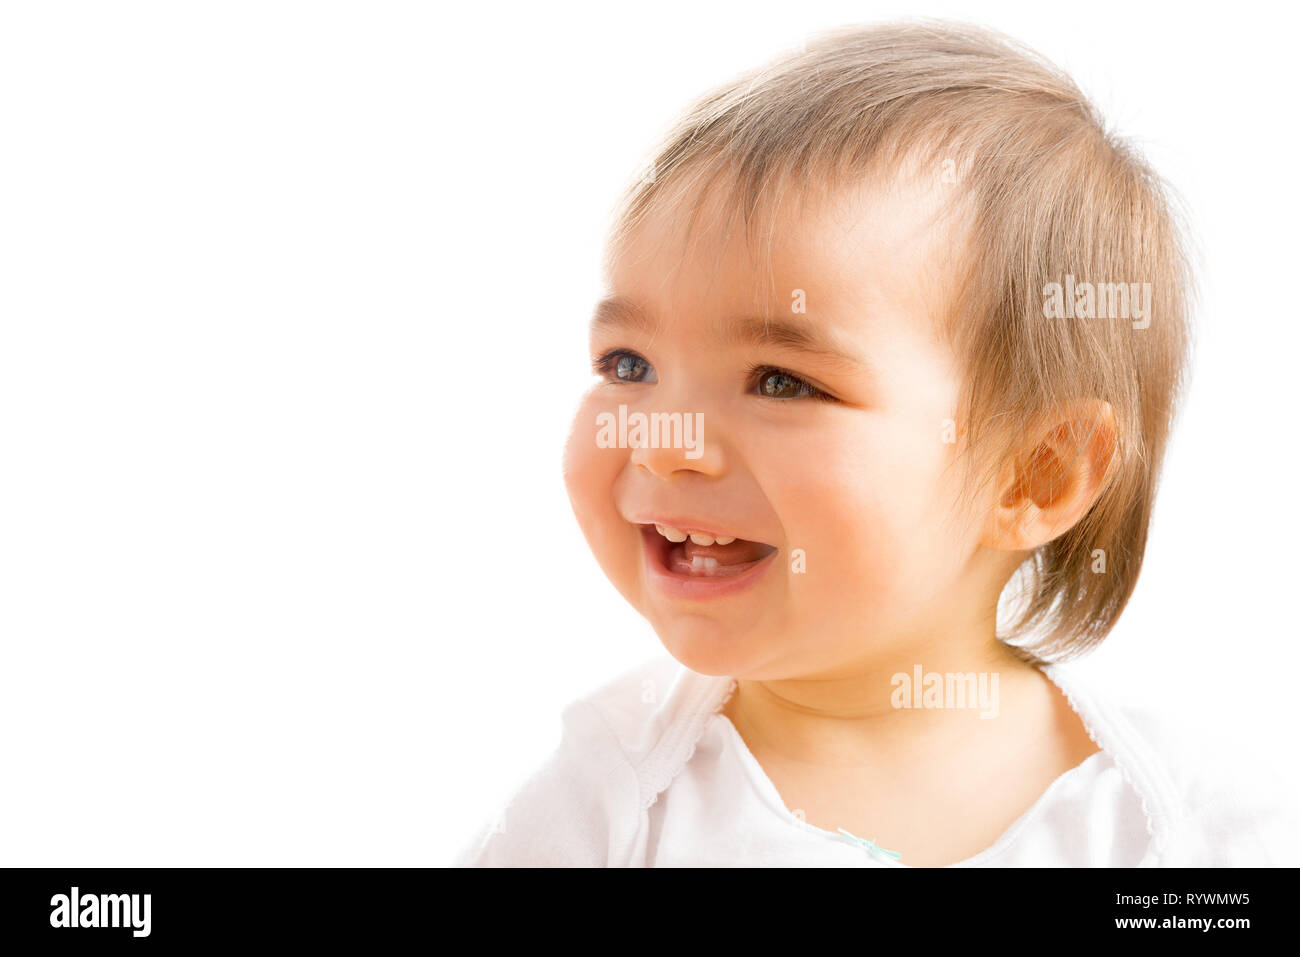 Close up of a 1 year old baby girl Stock Photo